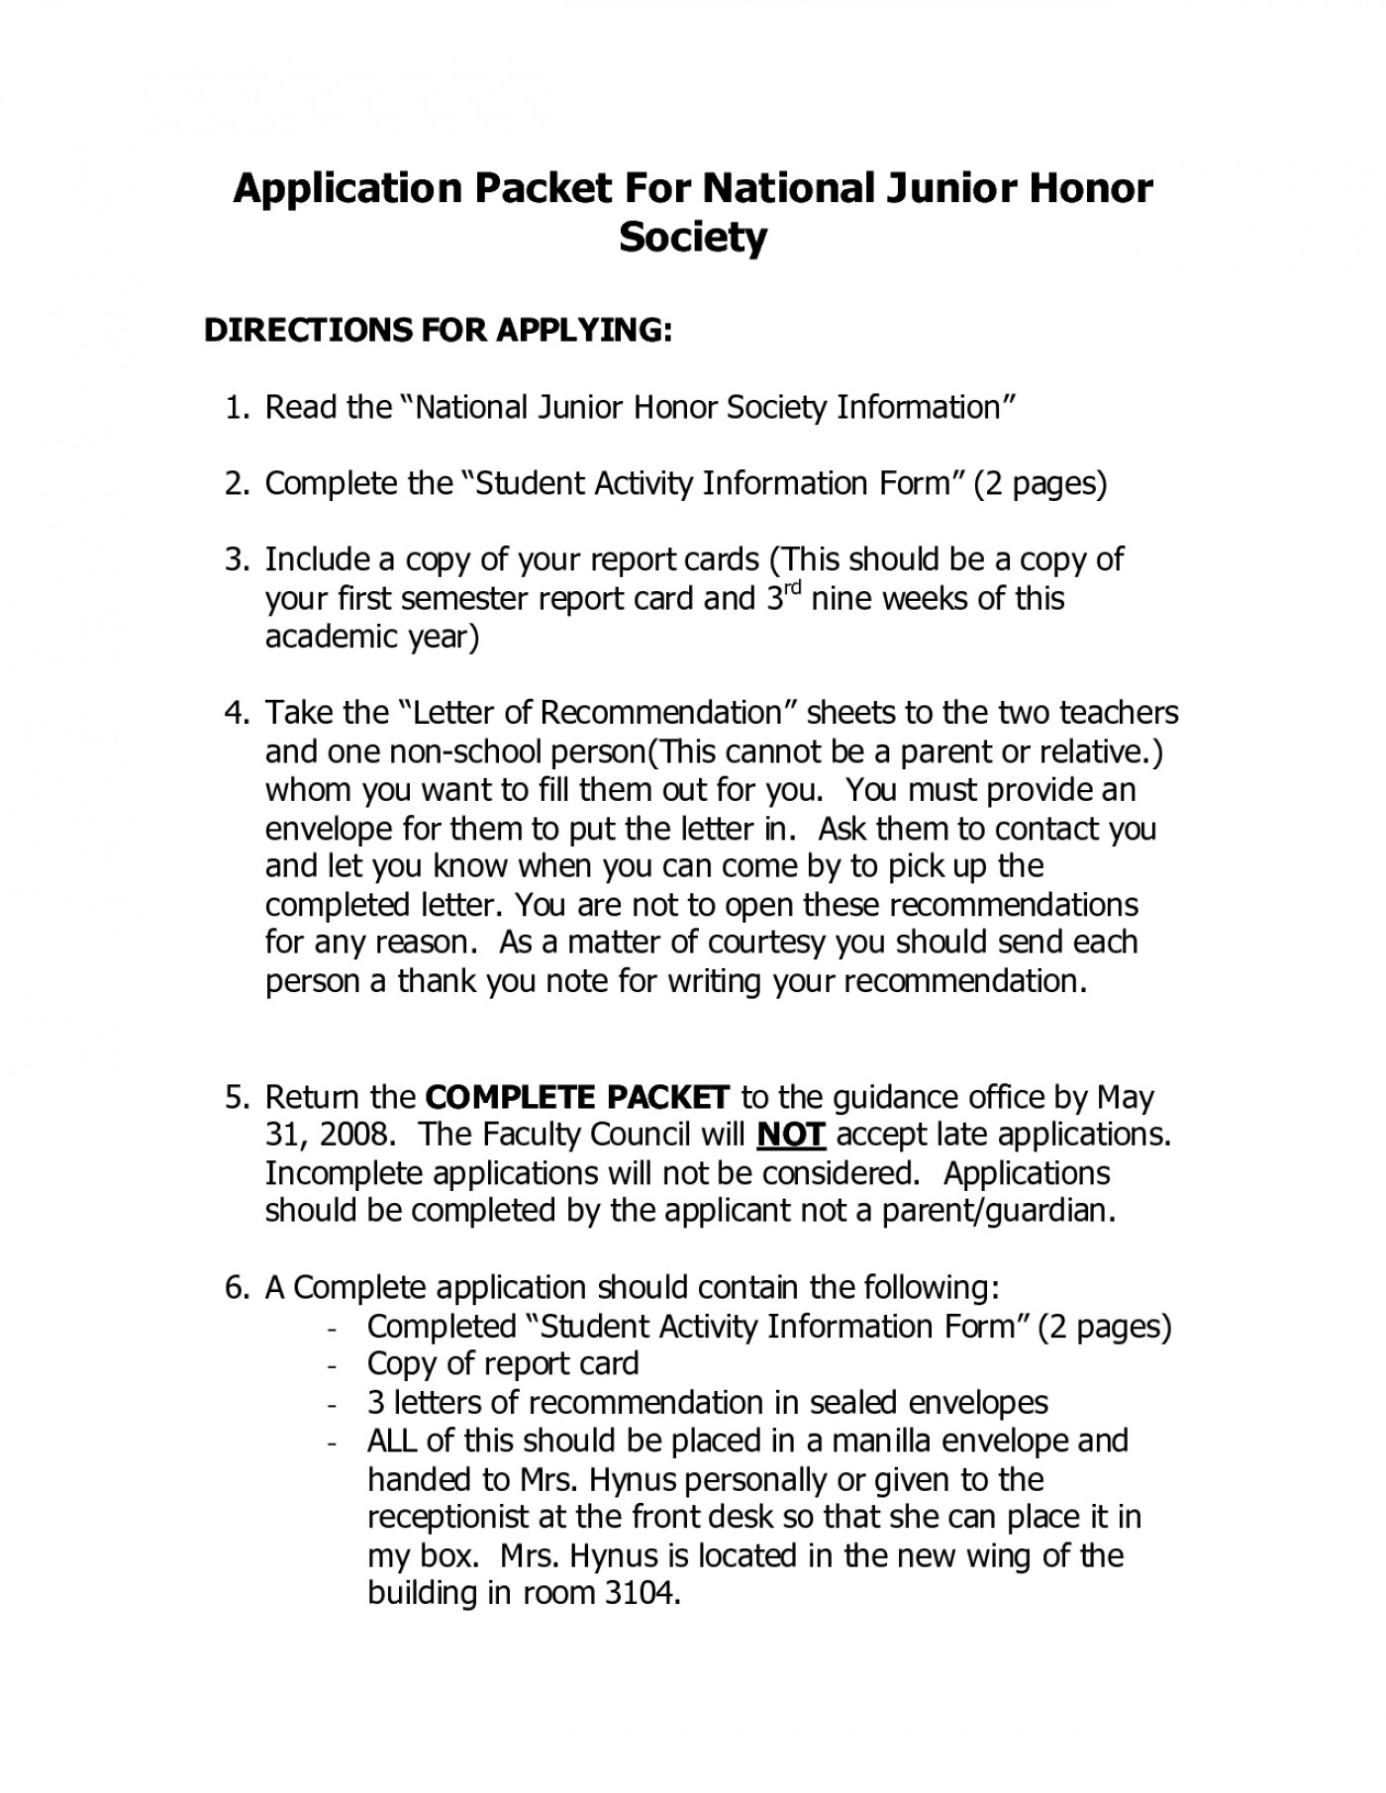 011 National Junior Honor Society Essay Samples Example ~ Thatsnotus With Regard To National Junior Honor Society Letter Of Recommendation Template